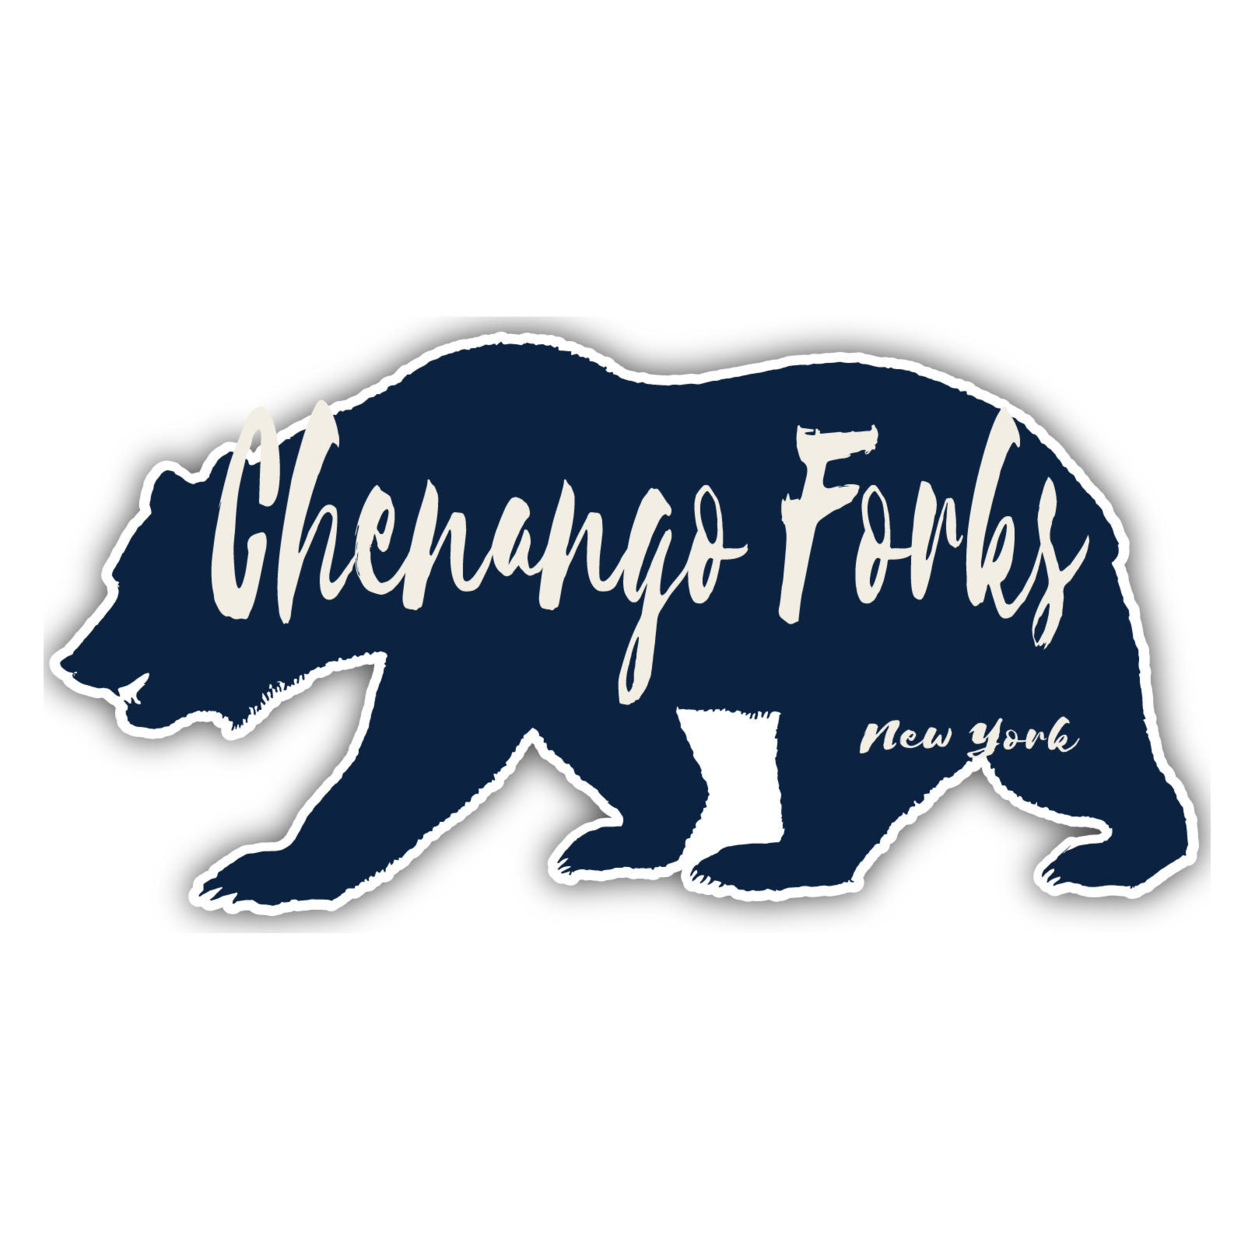 Chenango Forks New York Souvenir Decorative Stickers (Choose Theme And Size) - 4-Pack, 4-Inch, Bear